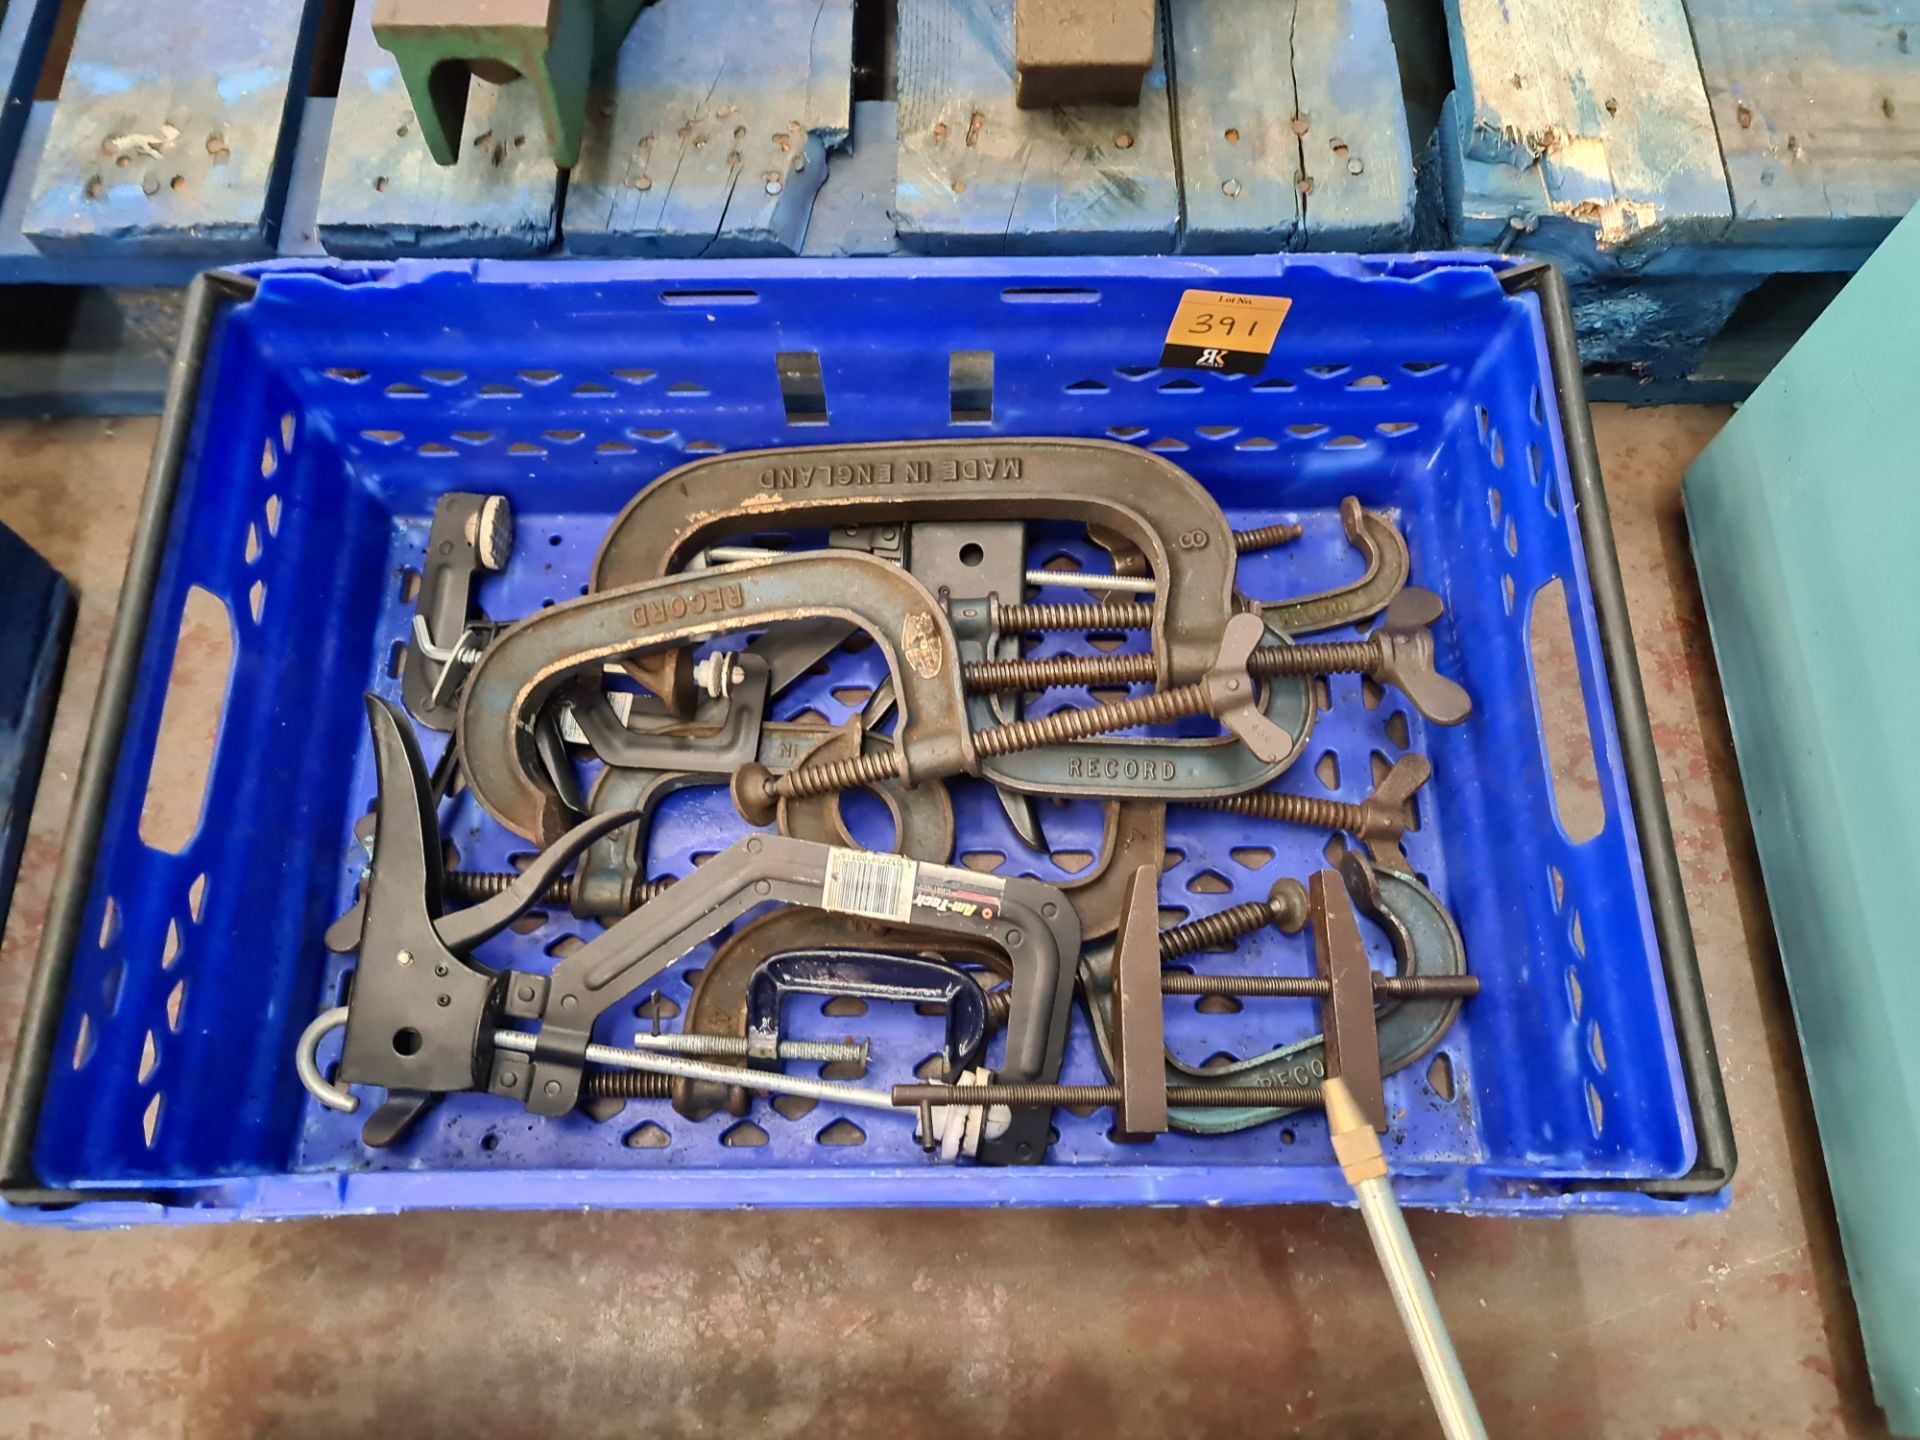 Contents of a crate of clamps - crate excluded